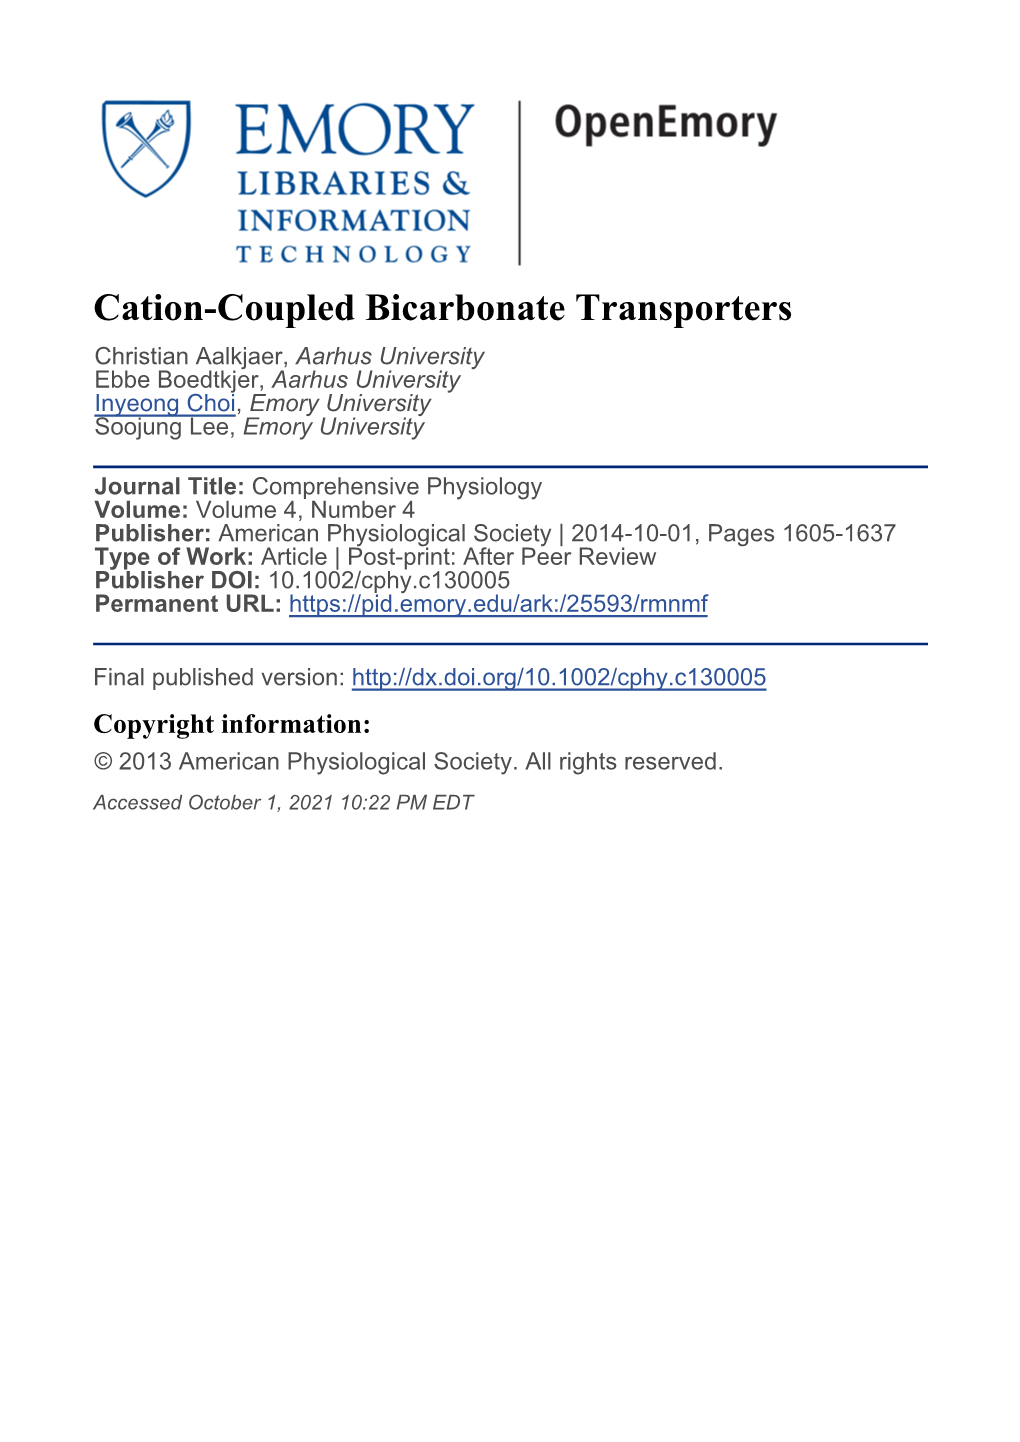 Cation-Coupled Bicarbonate Transporters